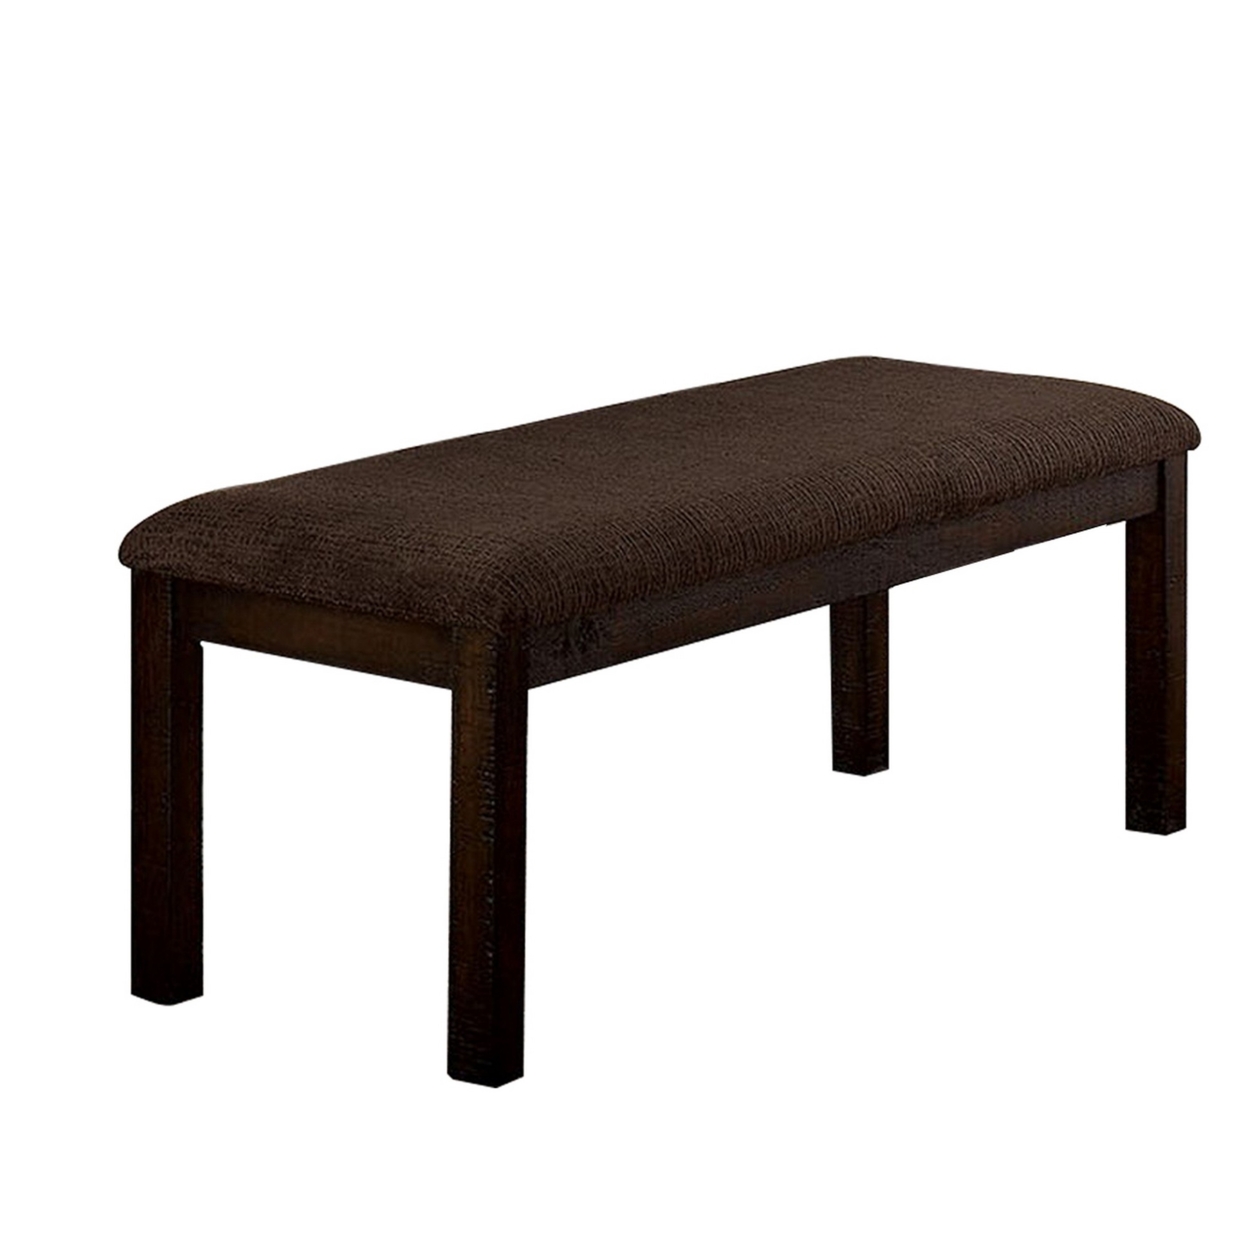 18 Inch Padded Bench With Wooden Frame, Brown- Saltoro Sherpi